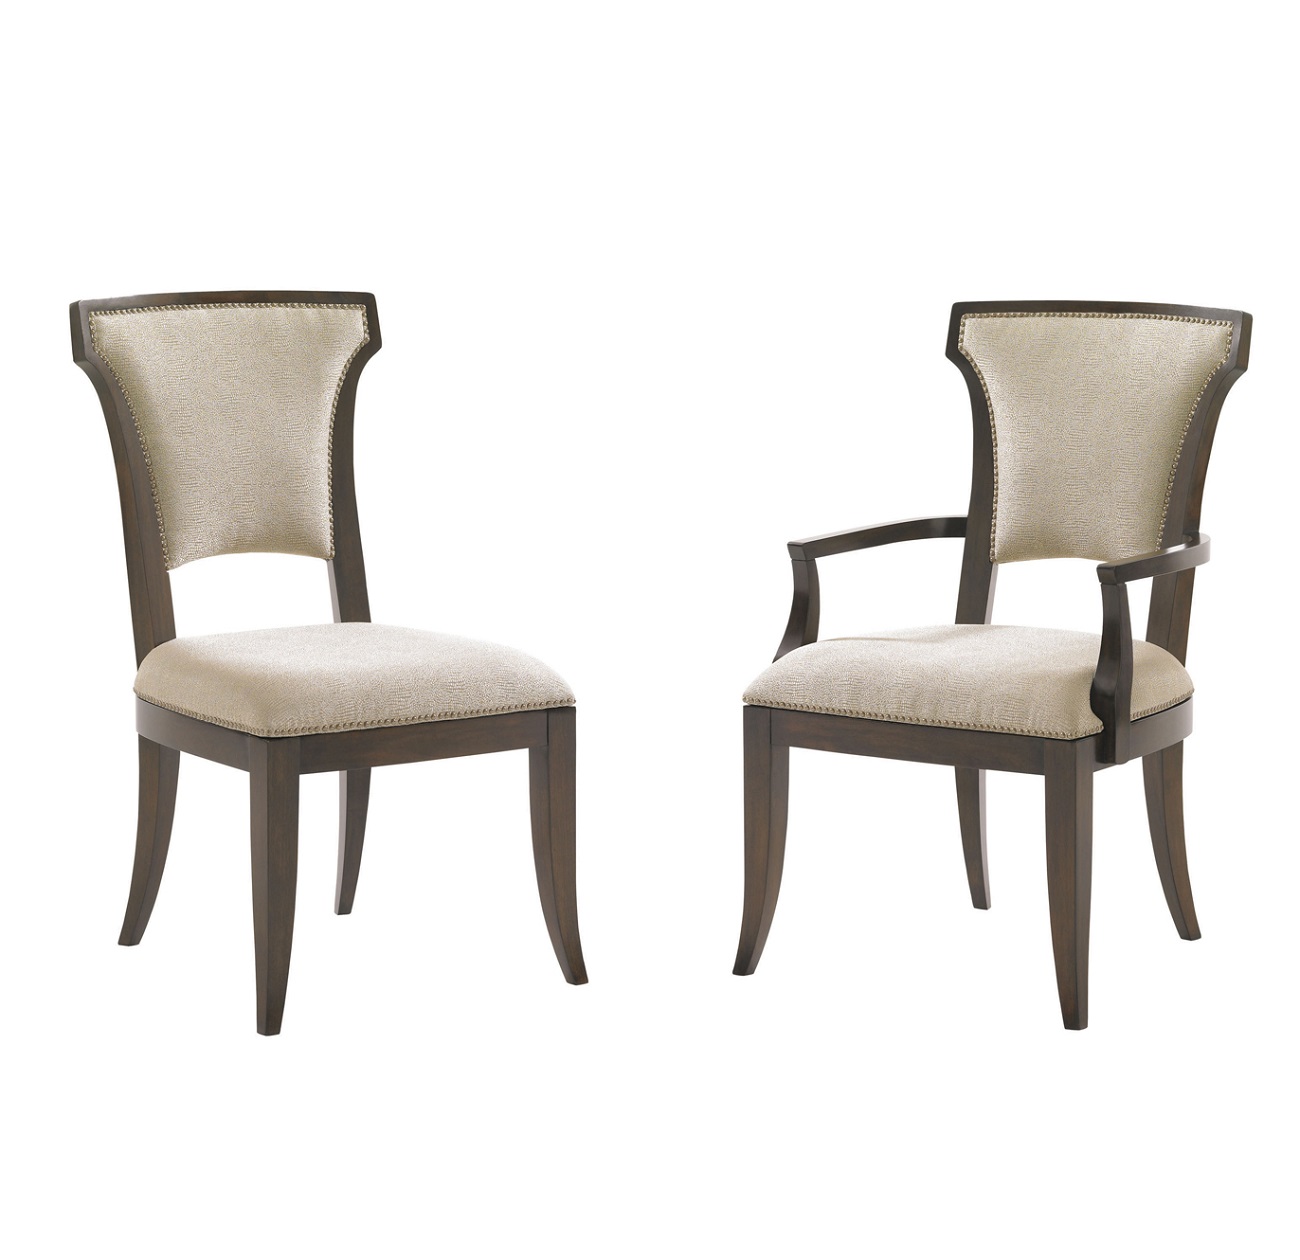 Tower Place Seneca Dining Chair, Lexington Tufted Dining Chairs For Sale